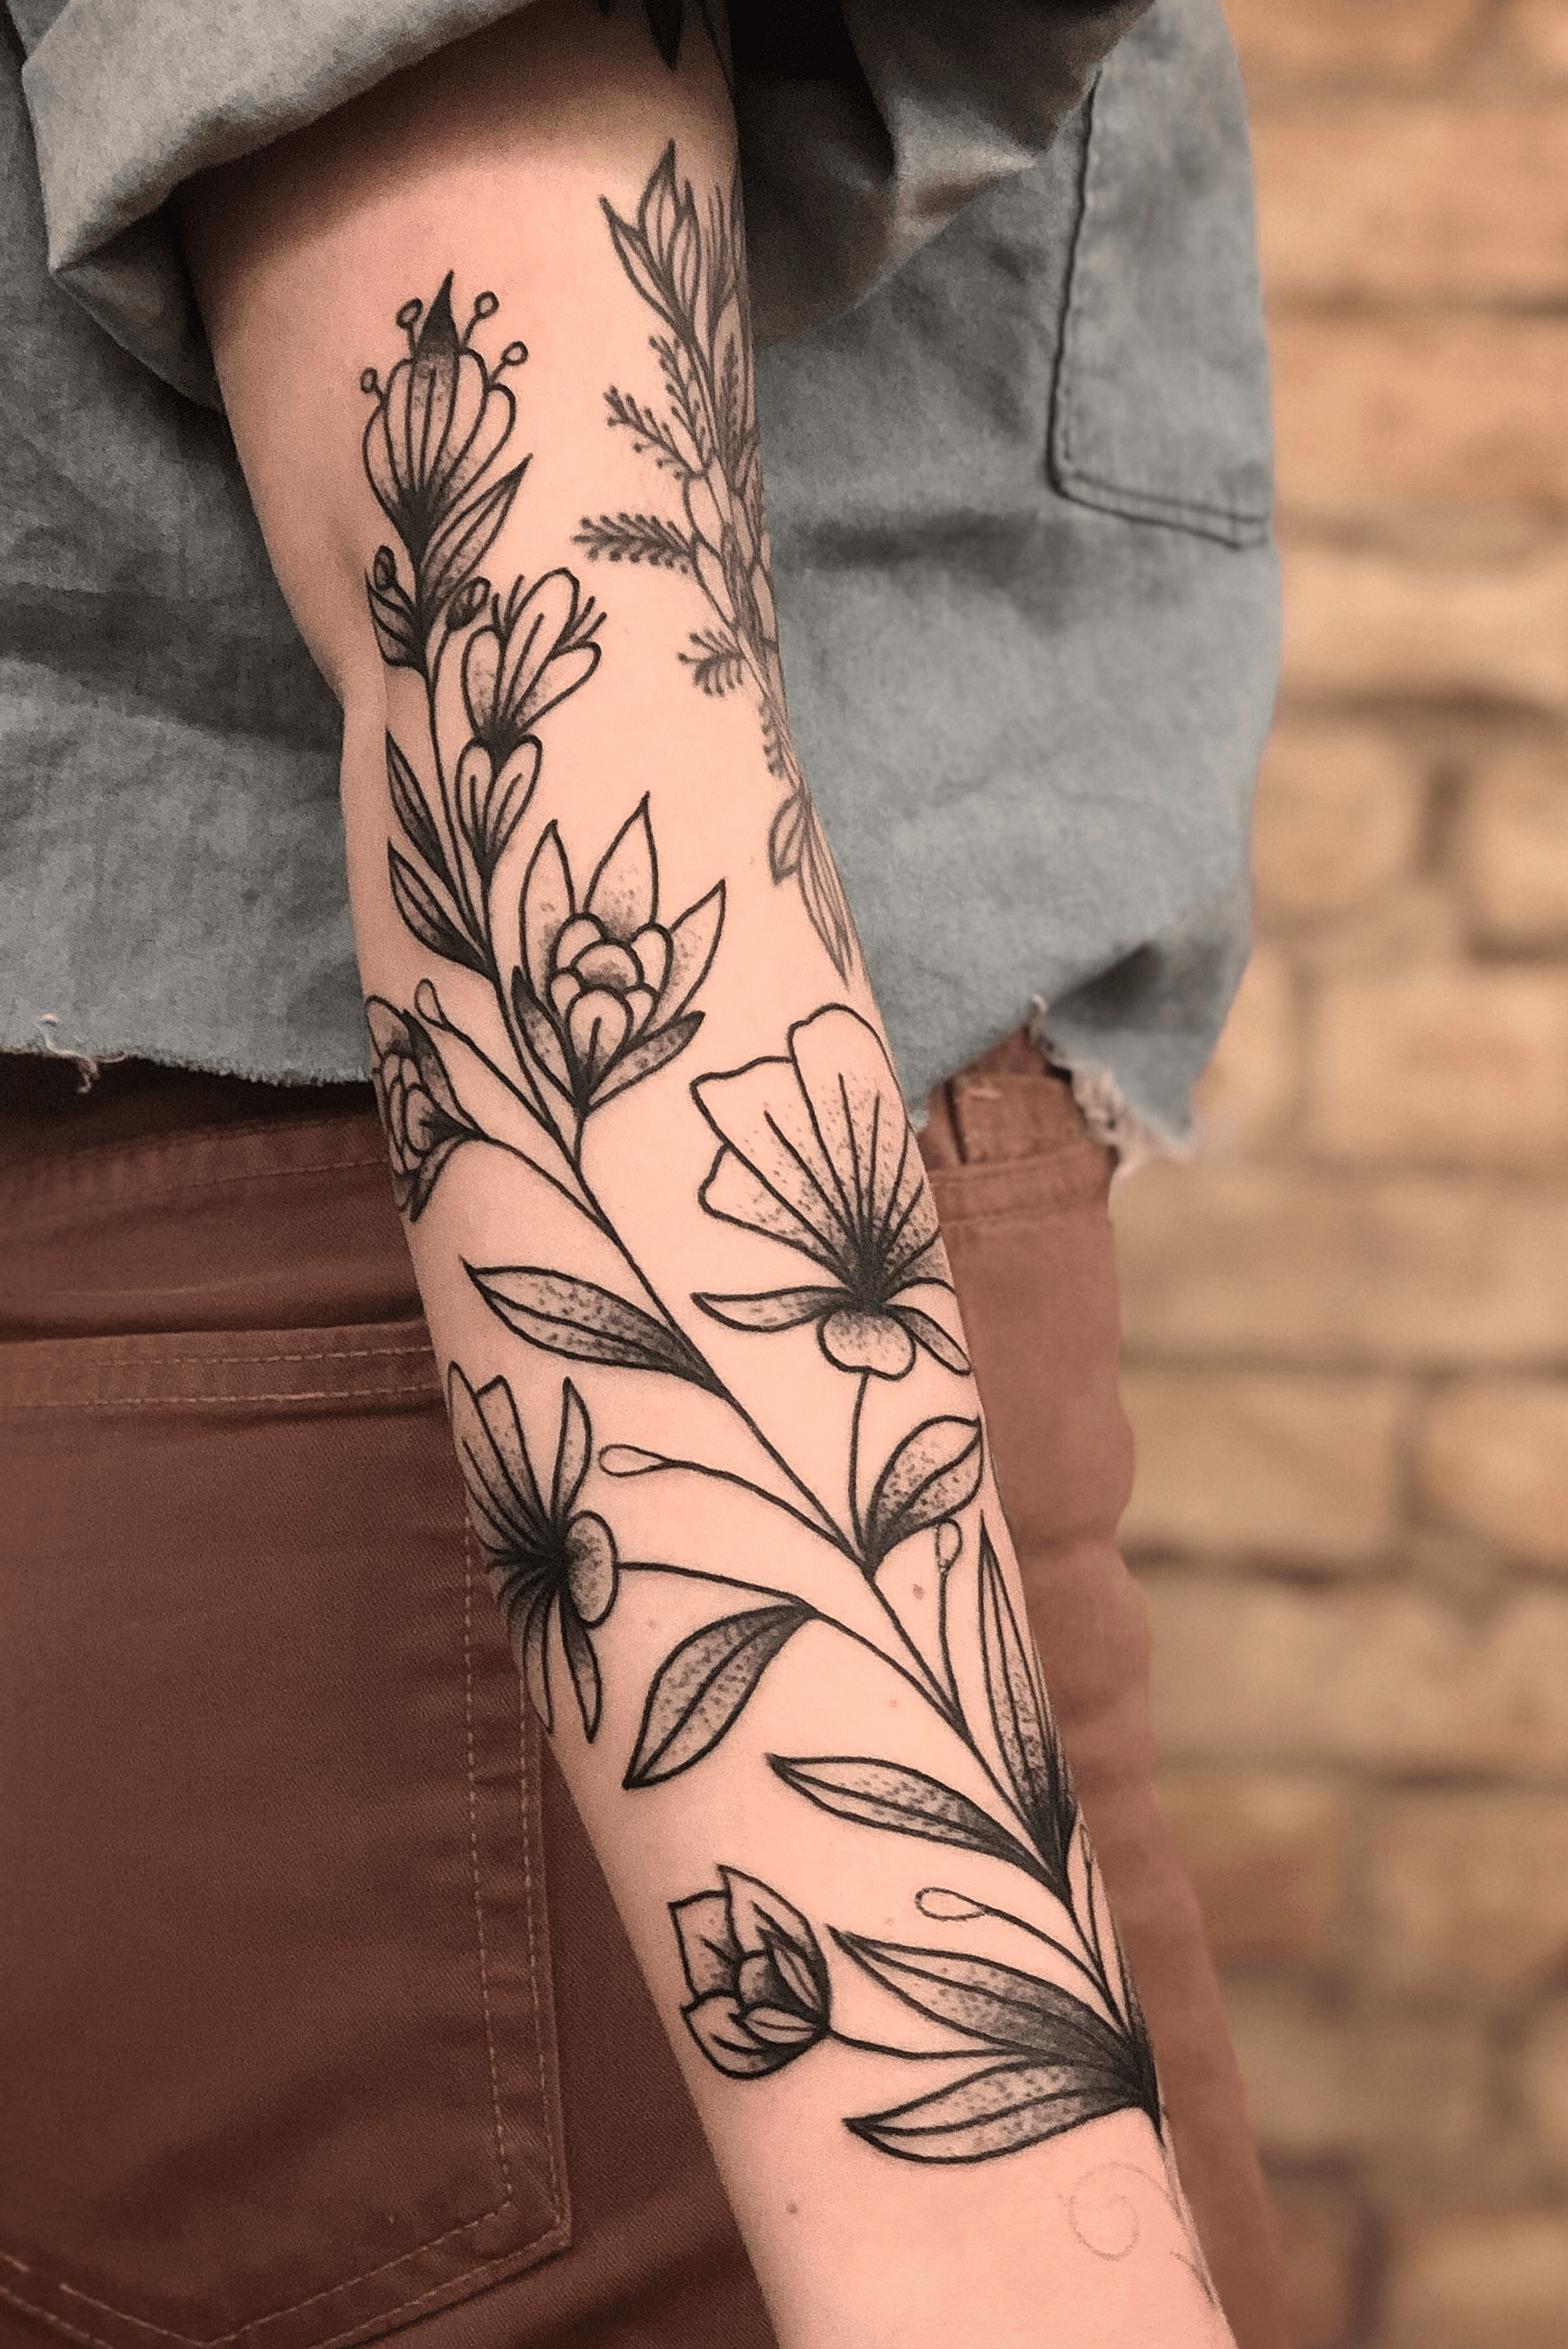 Whimsical Illustrative Tattoo Art Inspired by Animals and Plant Life